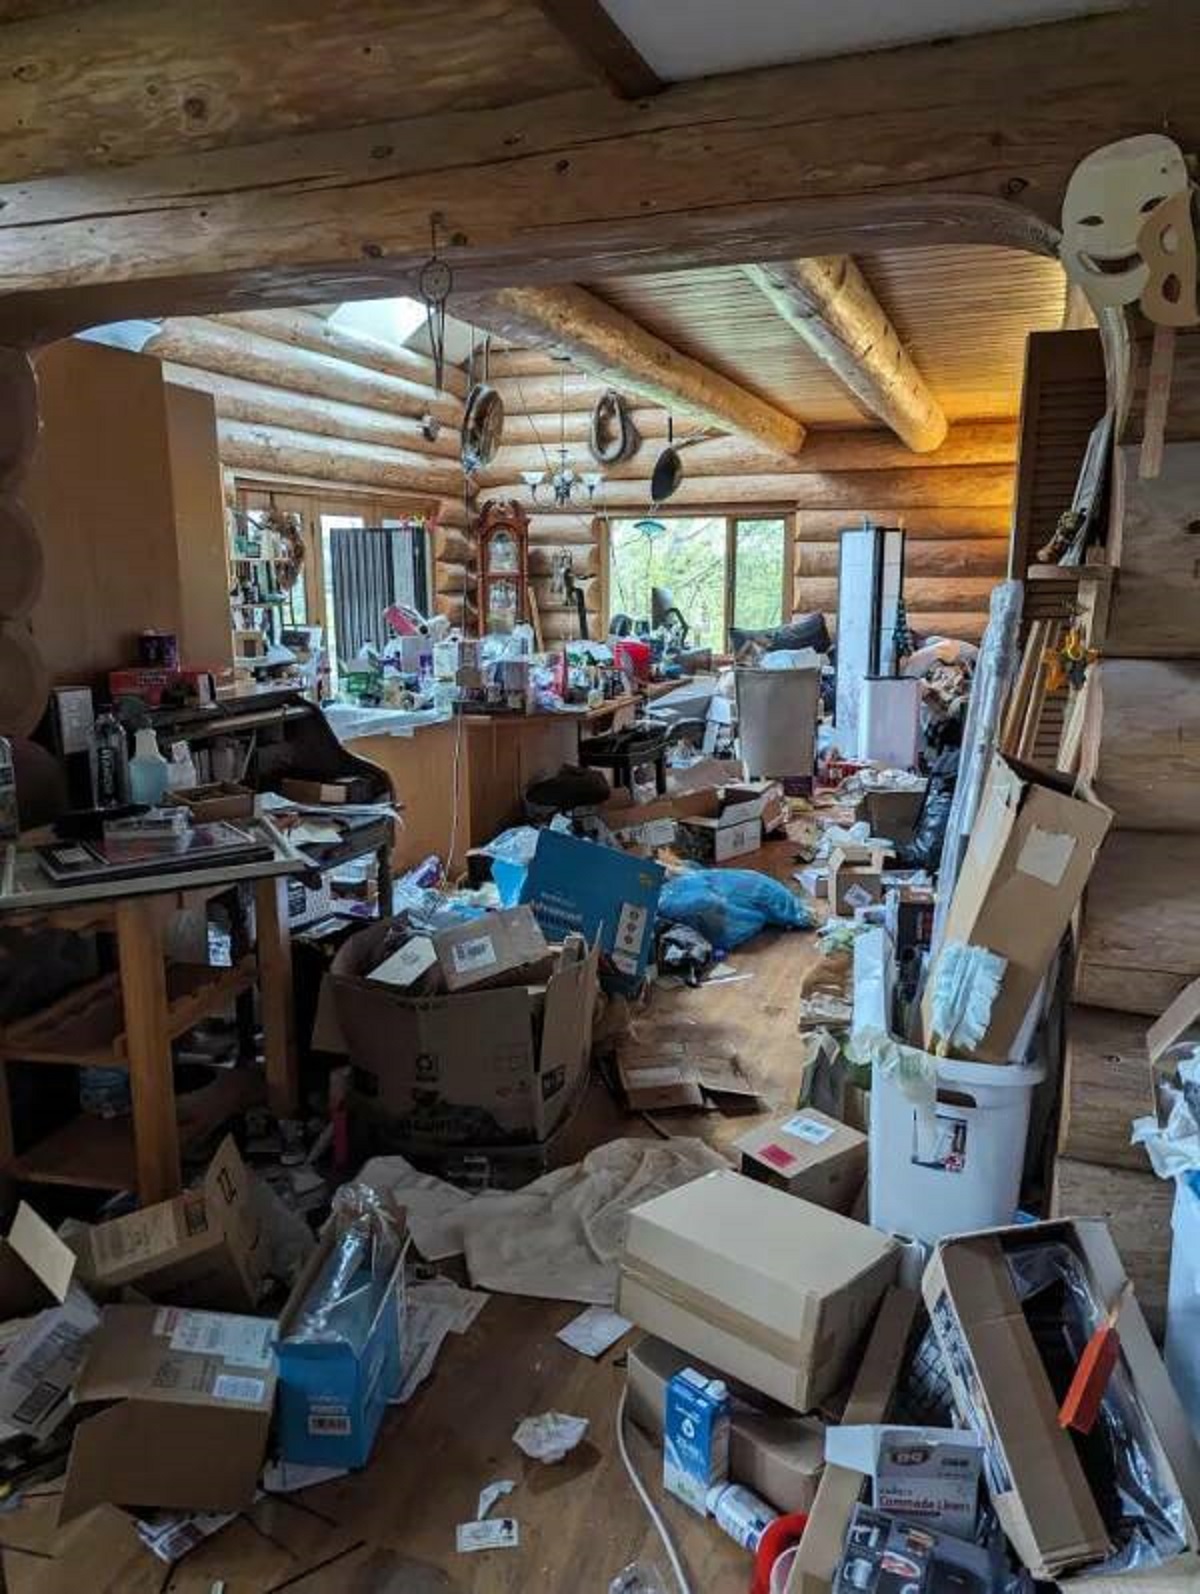 “I went to help my messy mom clean up her house in preparation to sell it.”